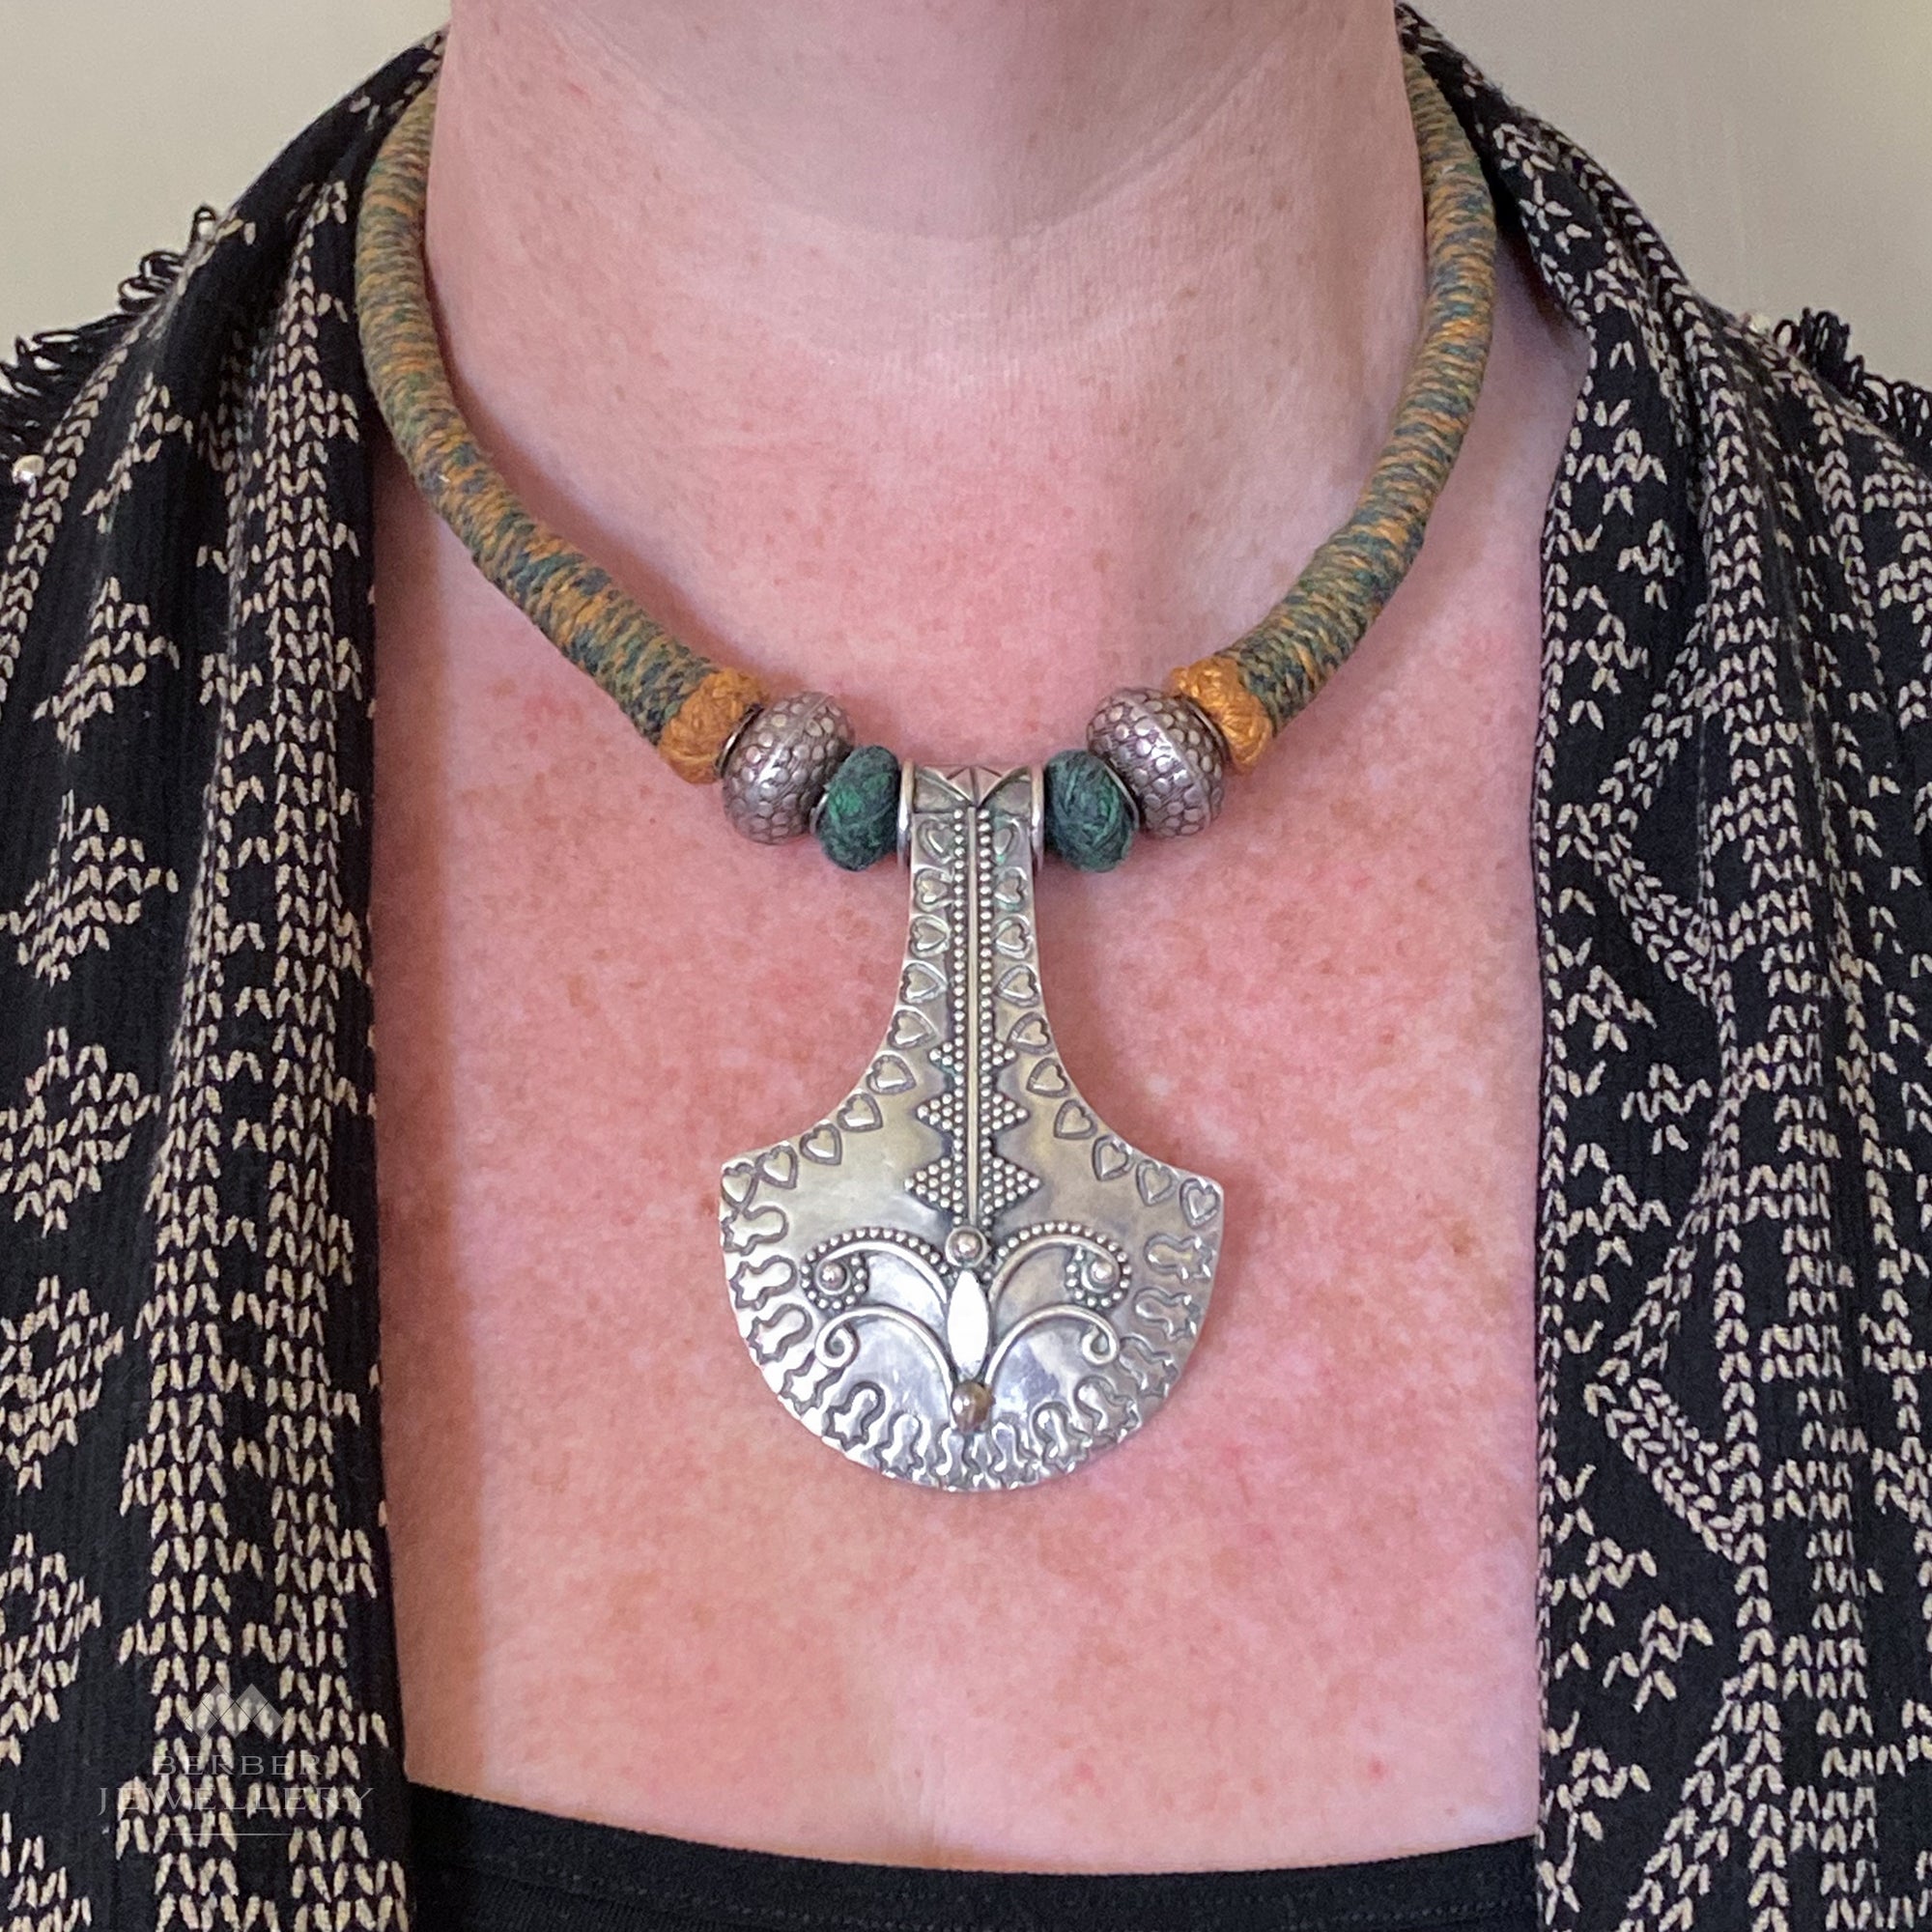 Silver pendant necklace from Jaipur